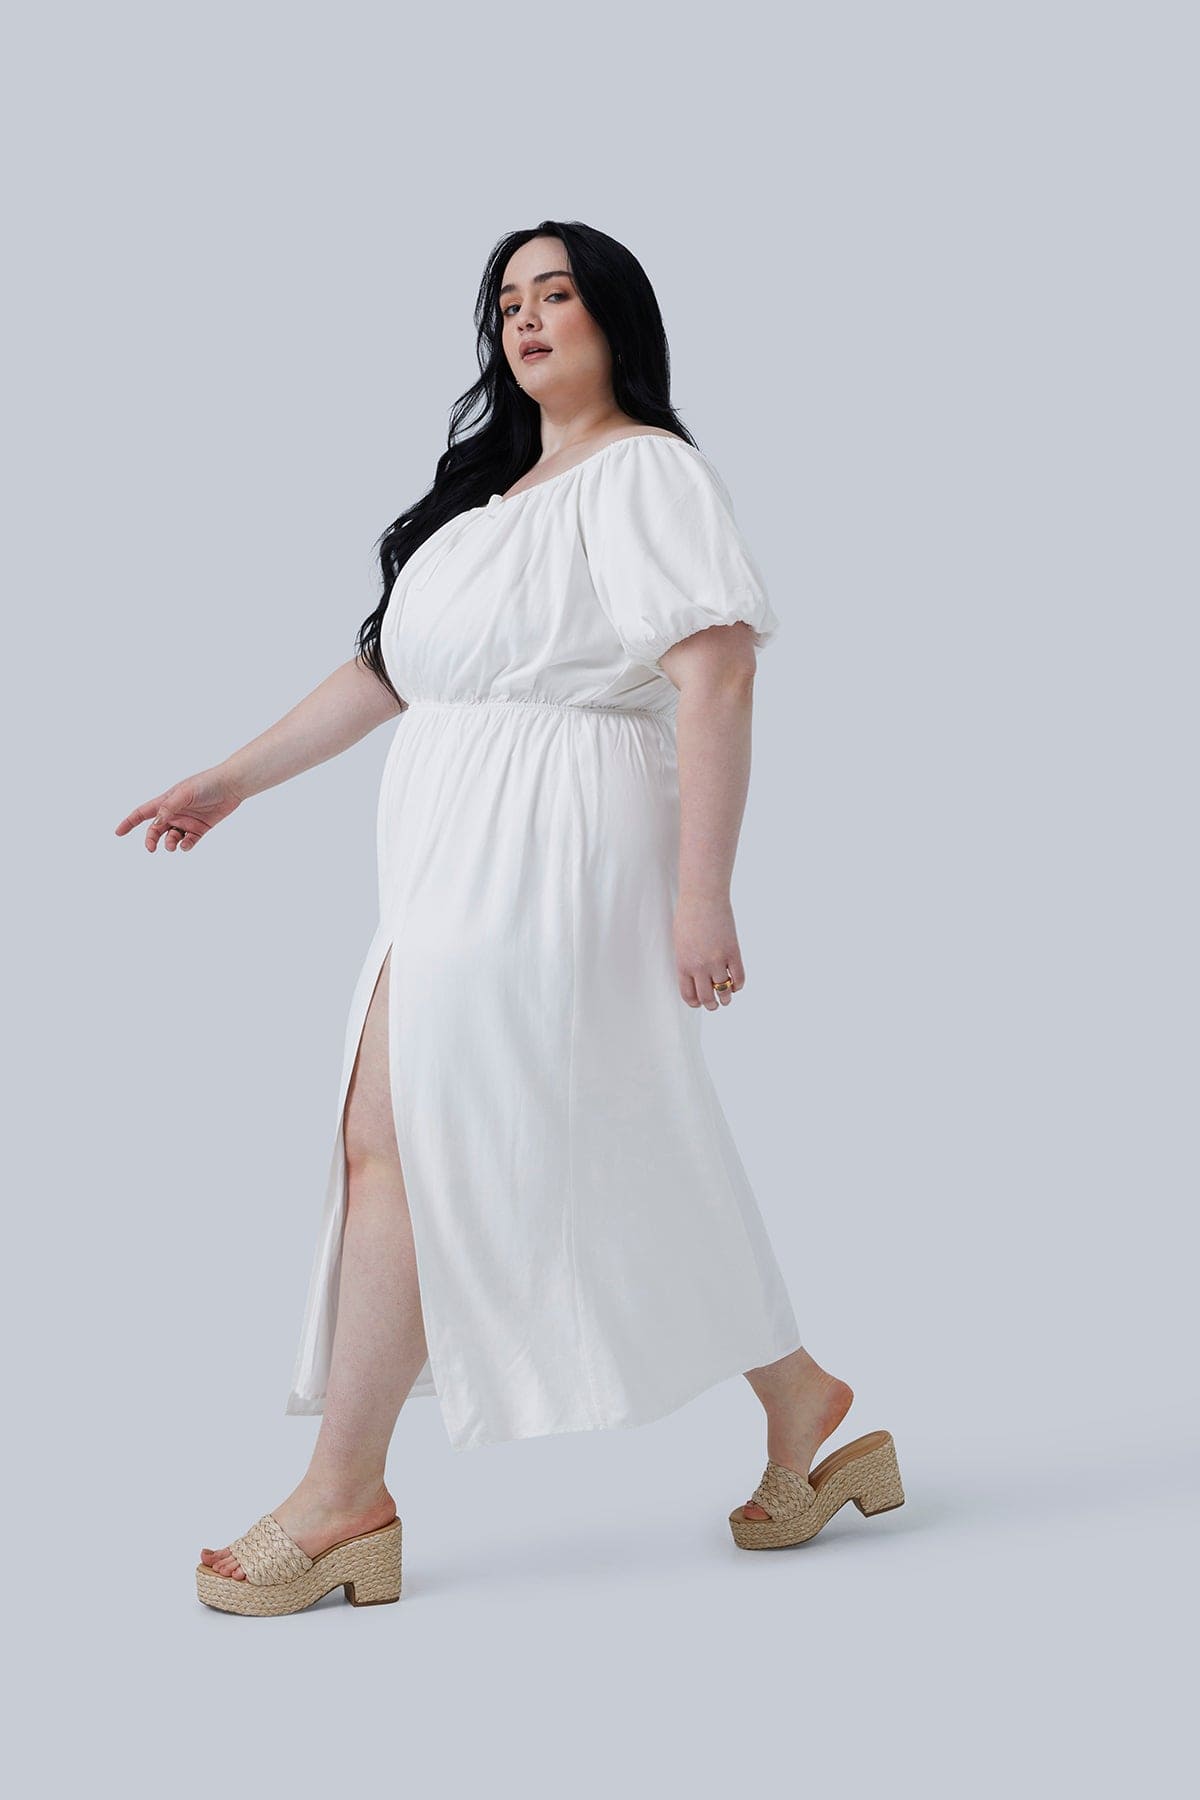 Side view of this plus size dress for women who LOVE fashion. Model is in the Gia IRL Gia Midi Dress size 3X in white. Model is taking a step and her long dark hair is over her shoulder.